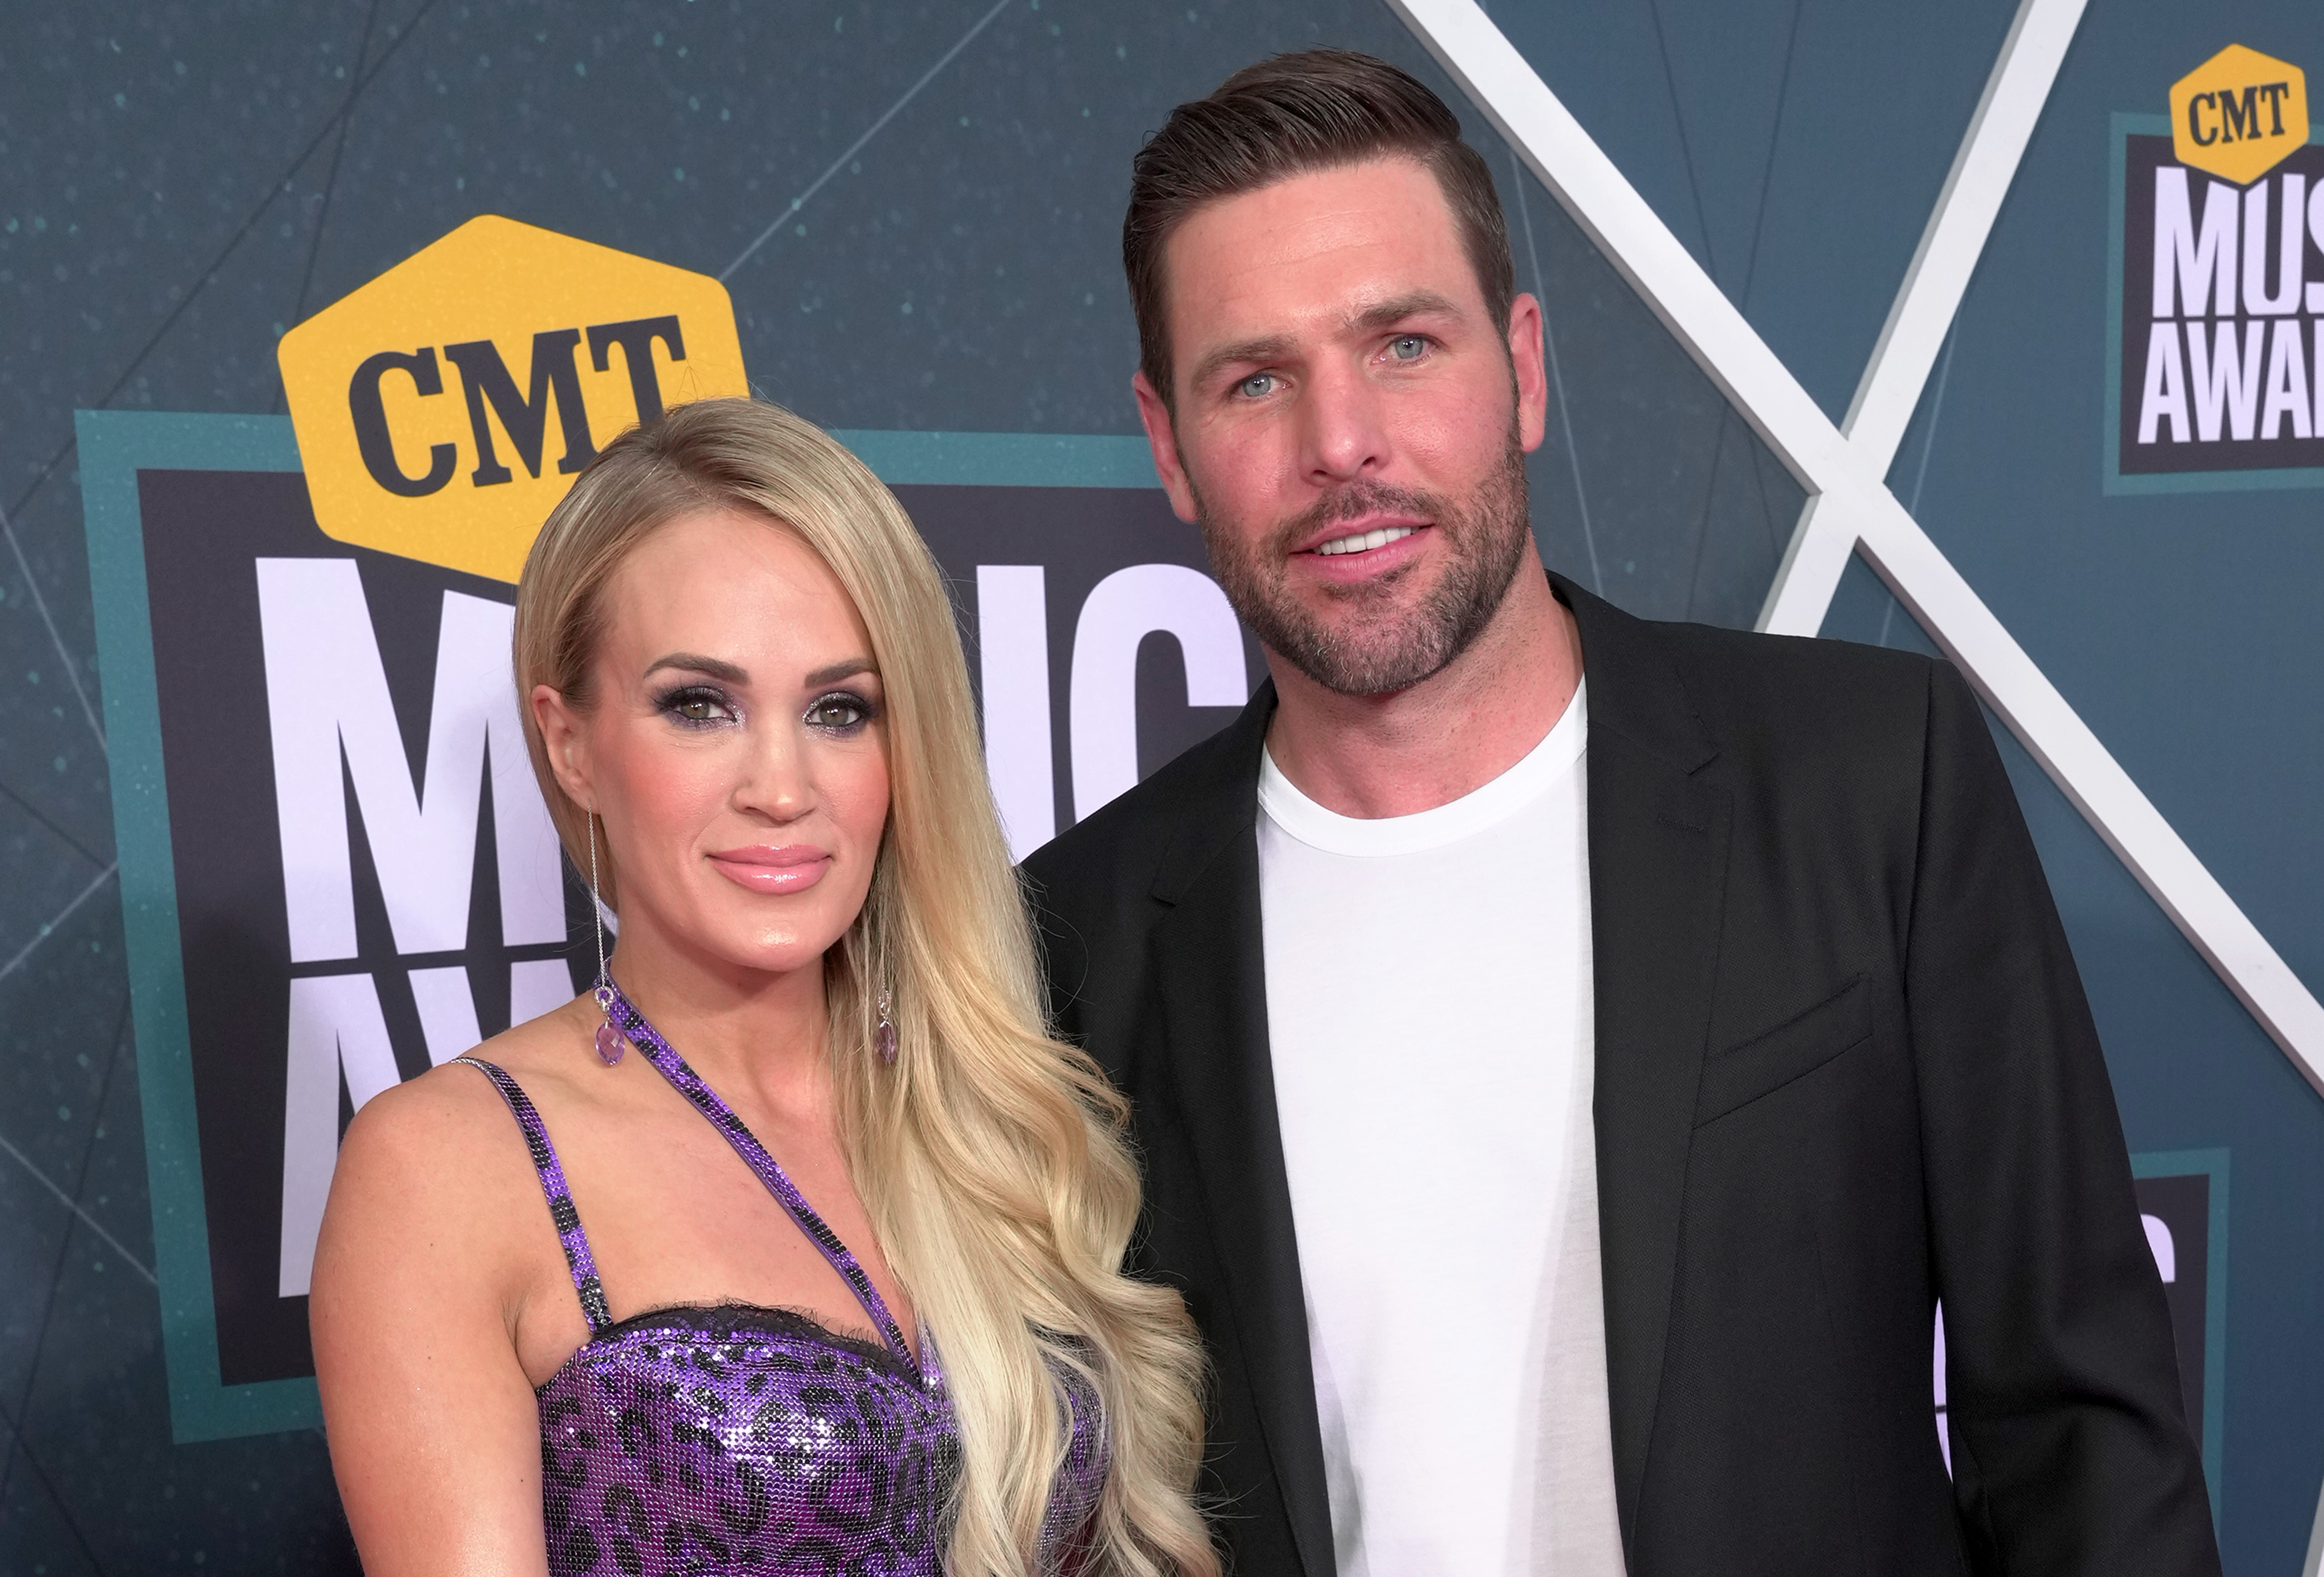 NASHVILLE, TENNESSEE - APRIL 11: Carrie Underwood and Mike Fisher attend the 2022 CMT Music Awards at Nashville Municipal Auditorium on April 11, 2022 in Nashville, Tennessee.